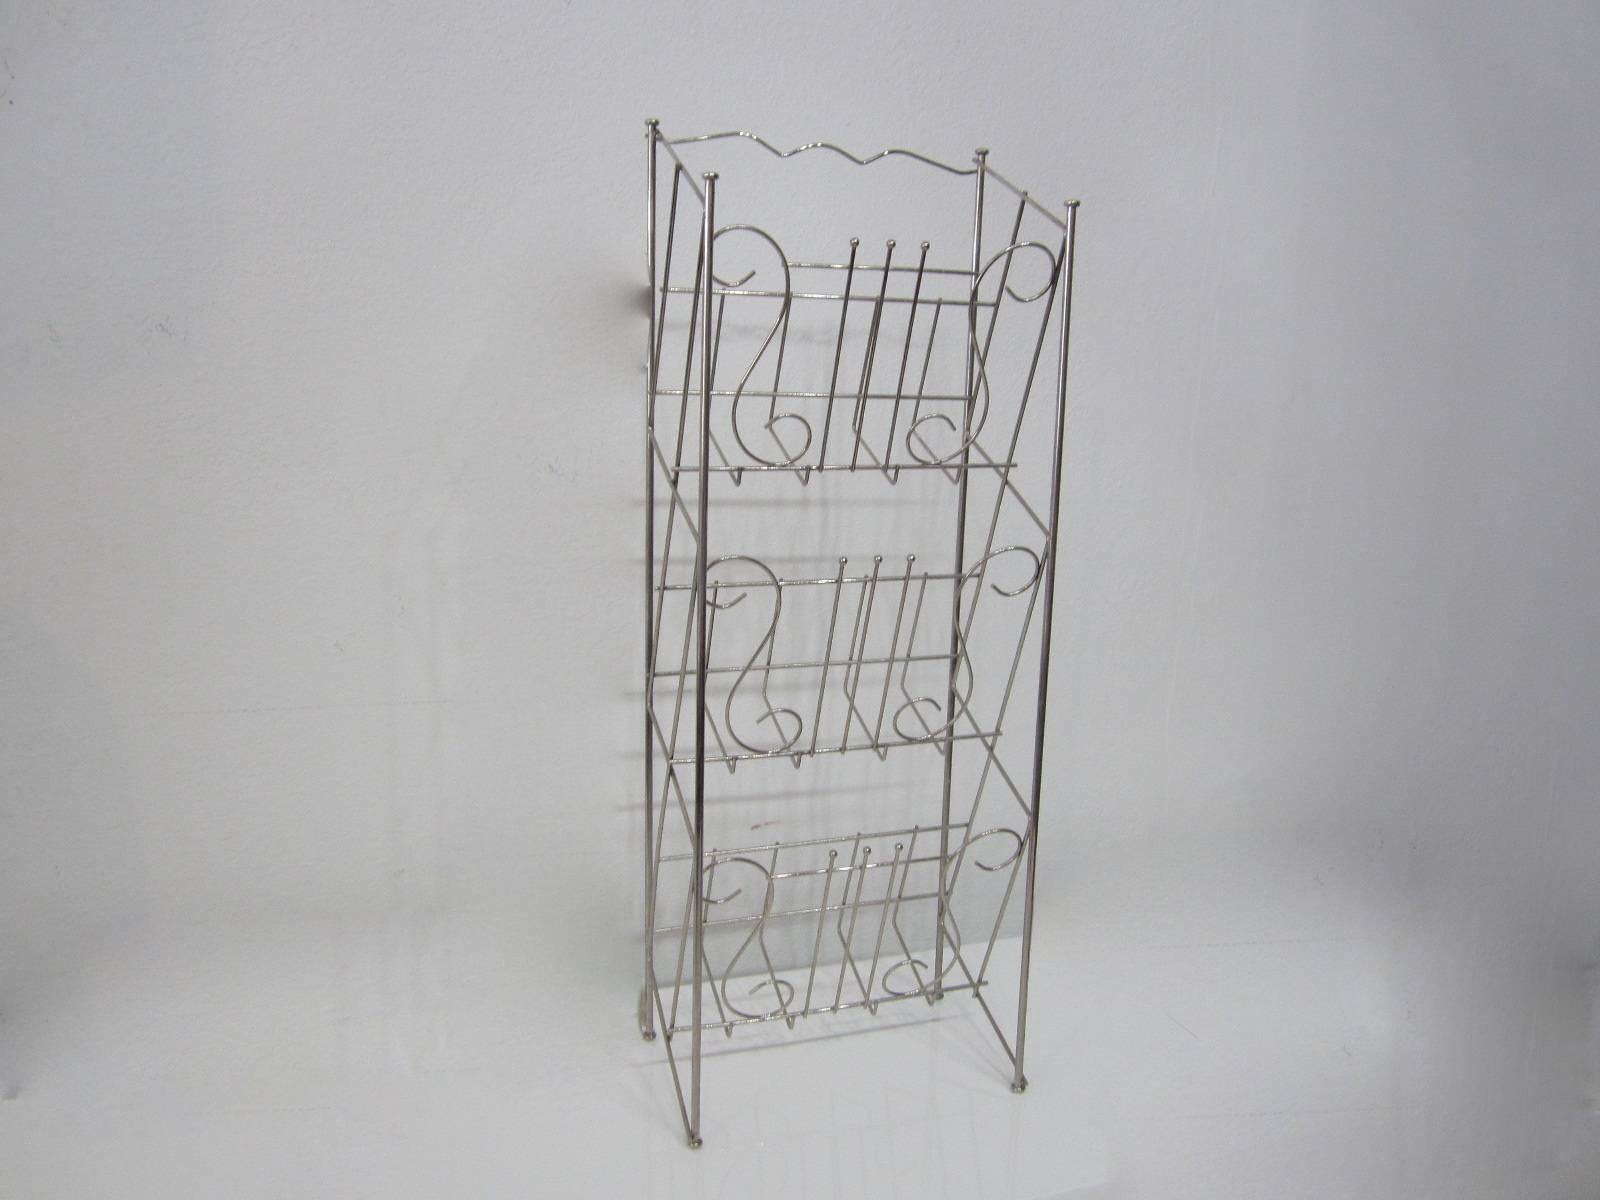 Great three-tier nickel stand with musical notes on it made to hold record albums and books.